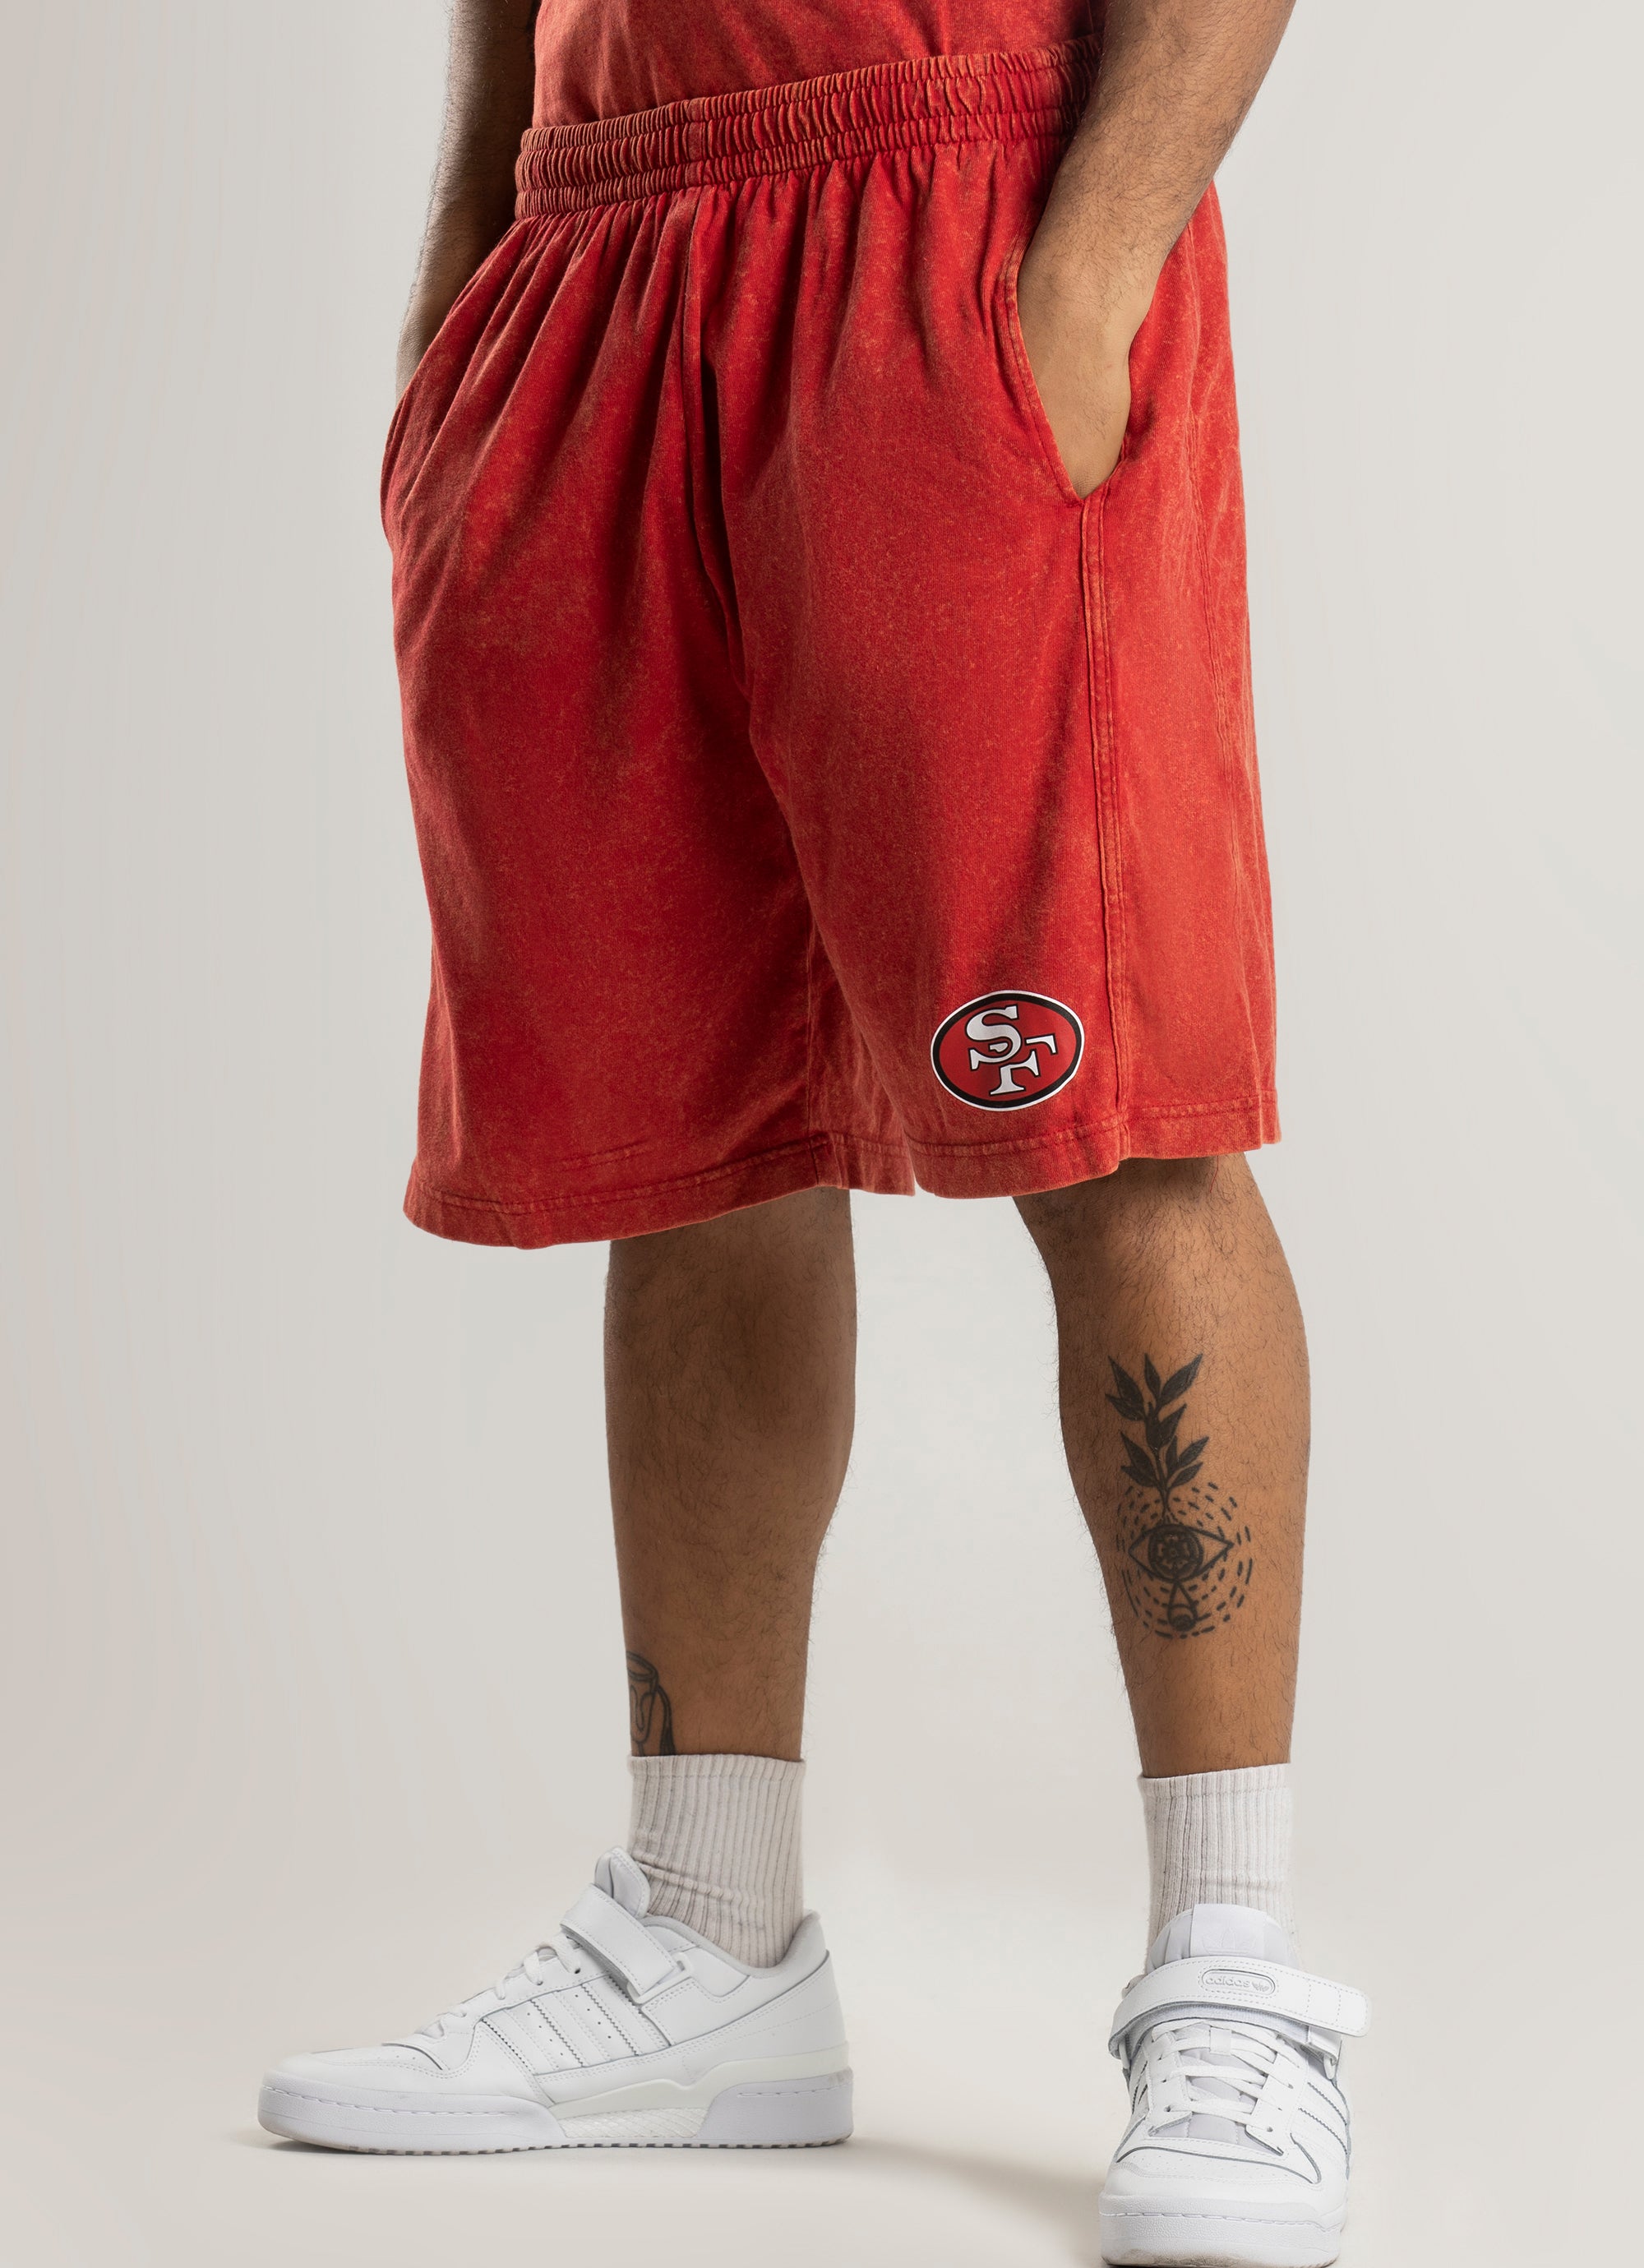 mitchell and ness 49ers shorts